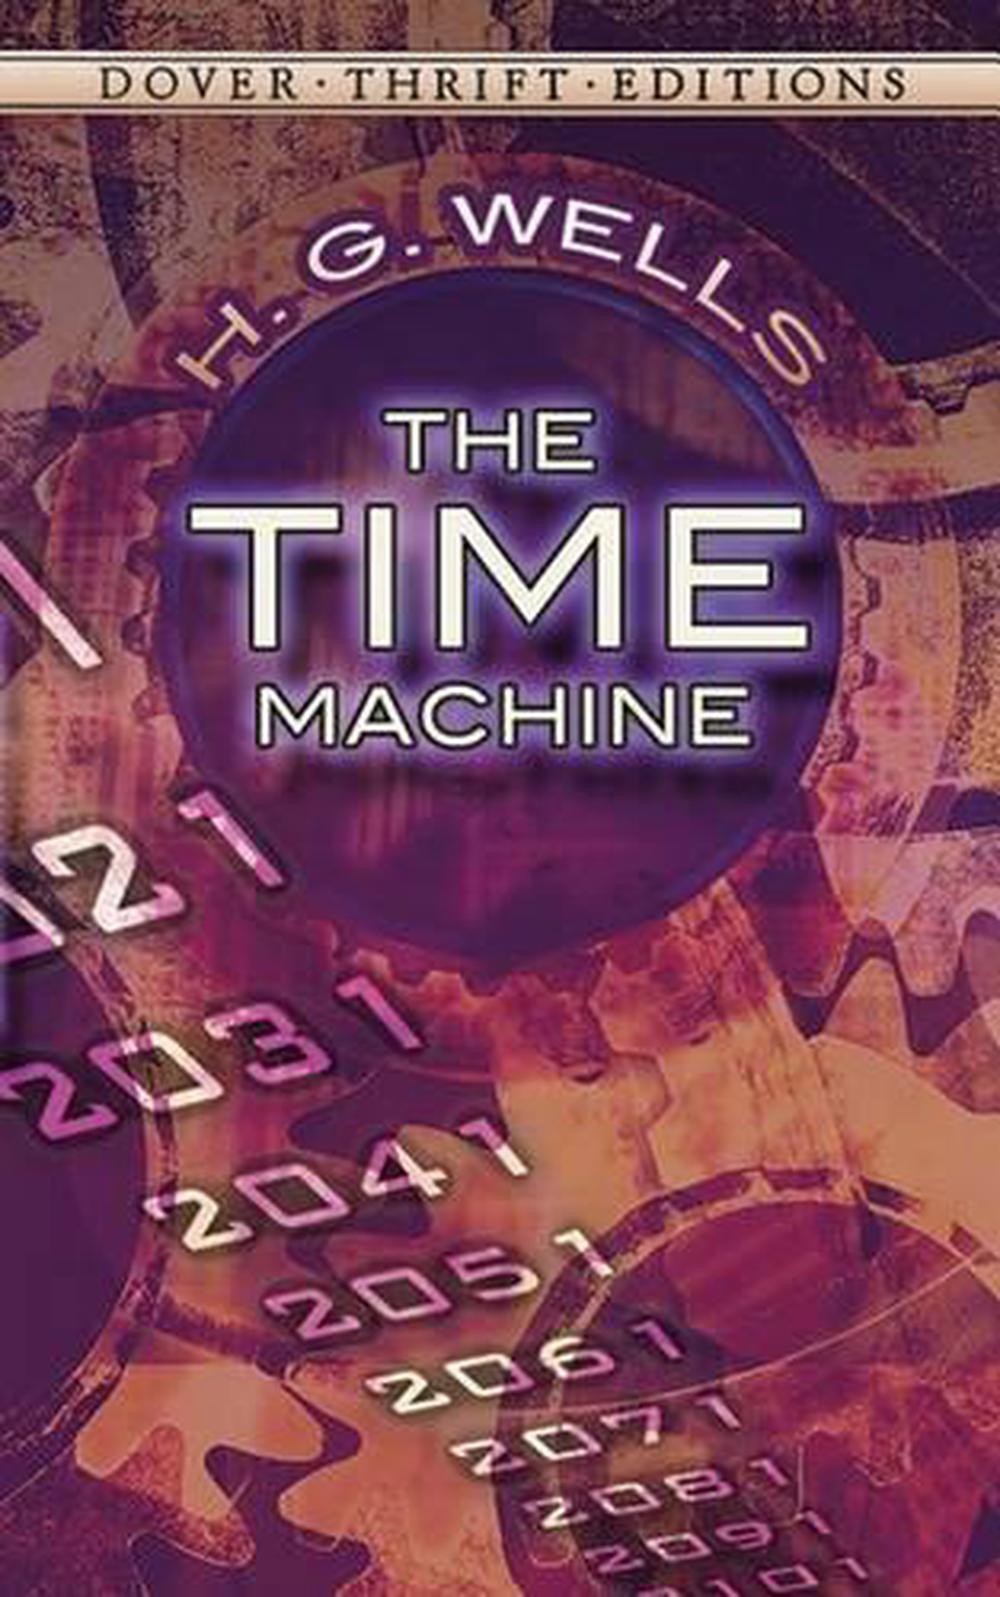 book review of time machine